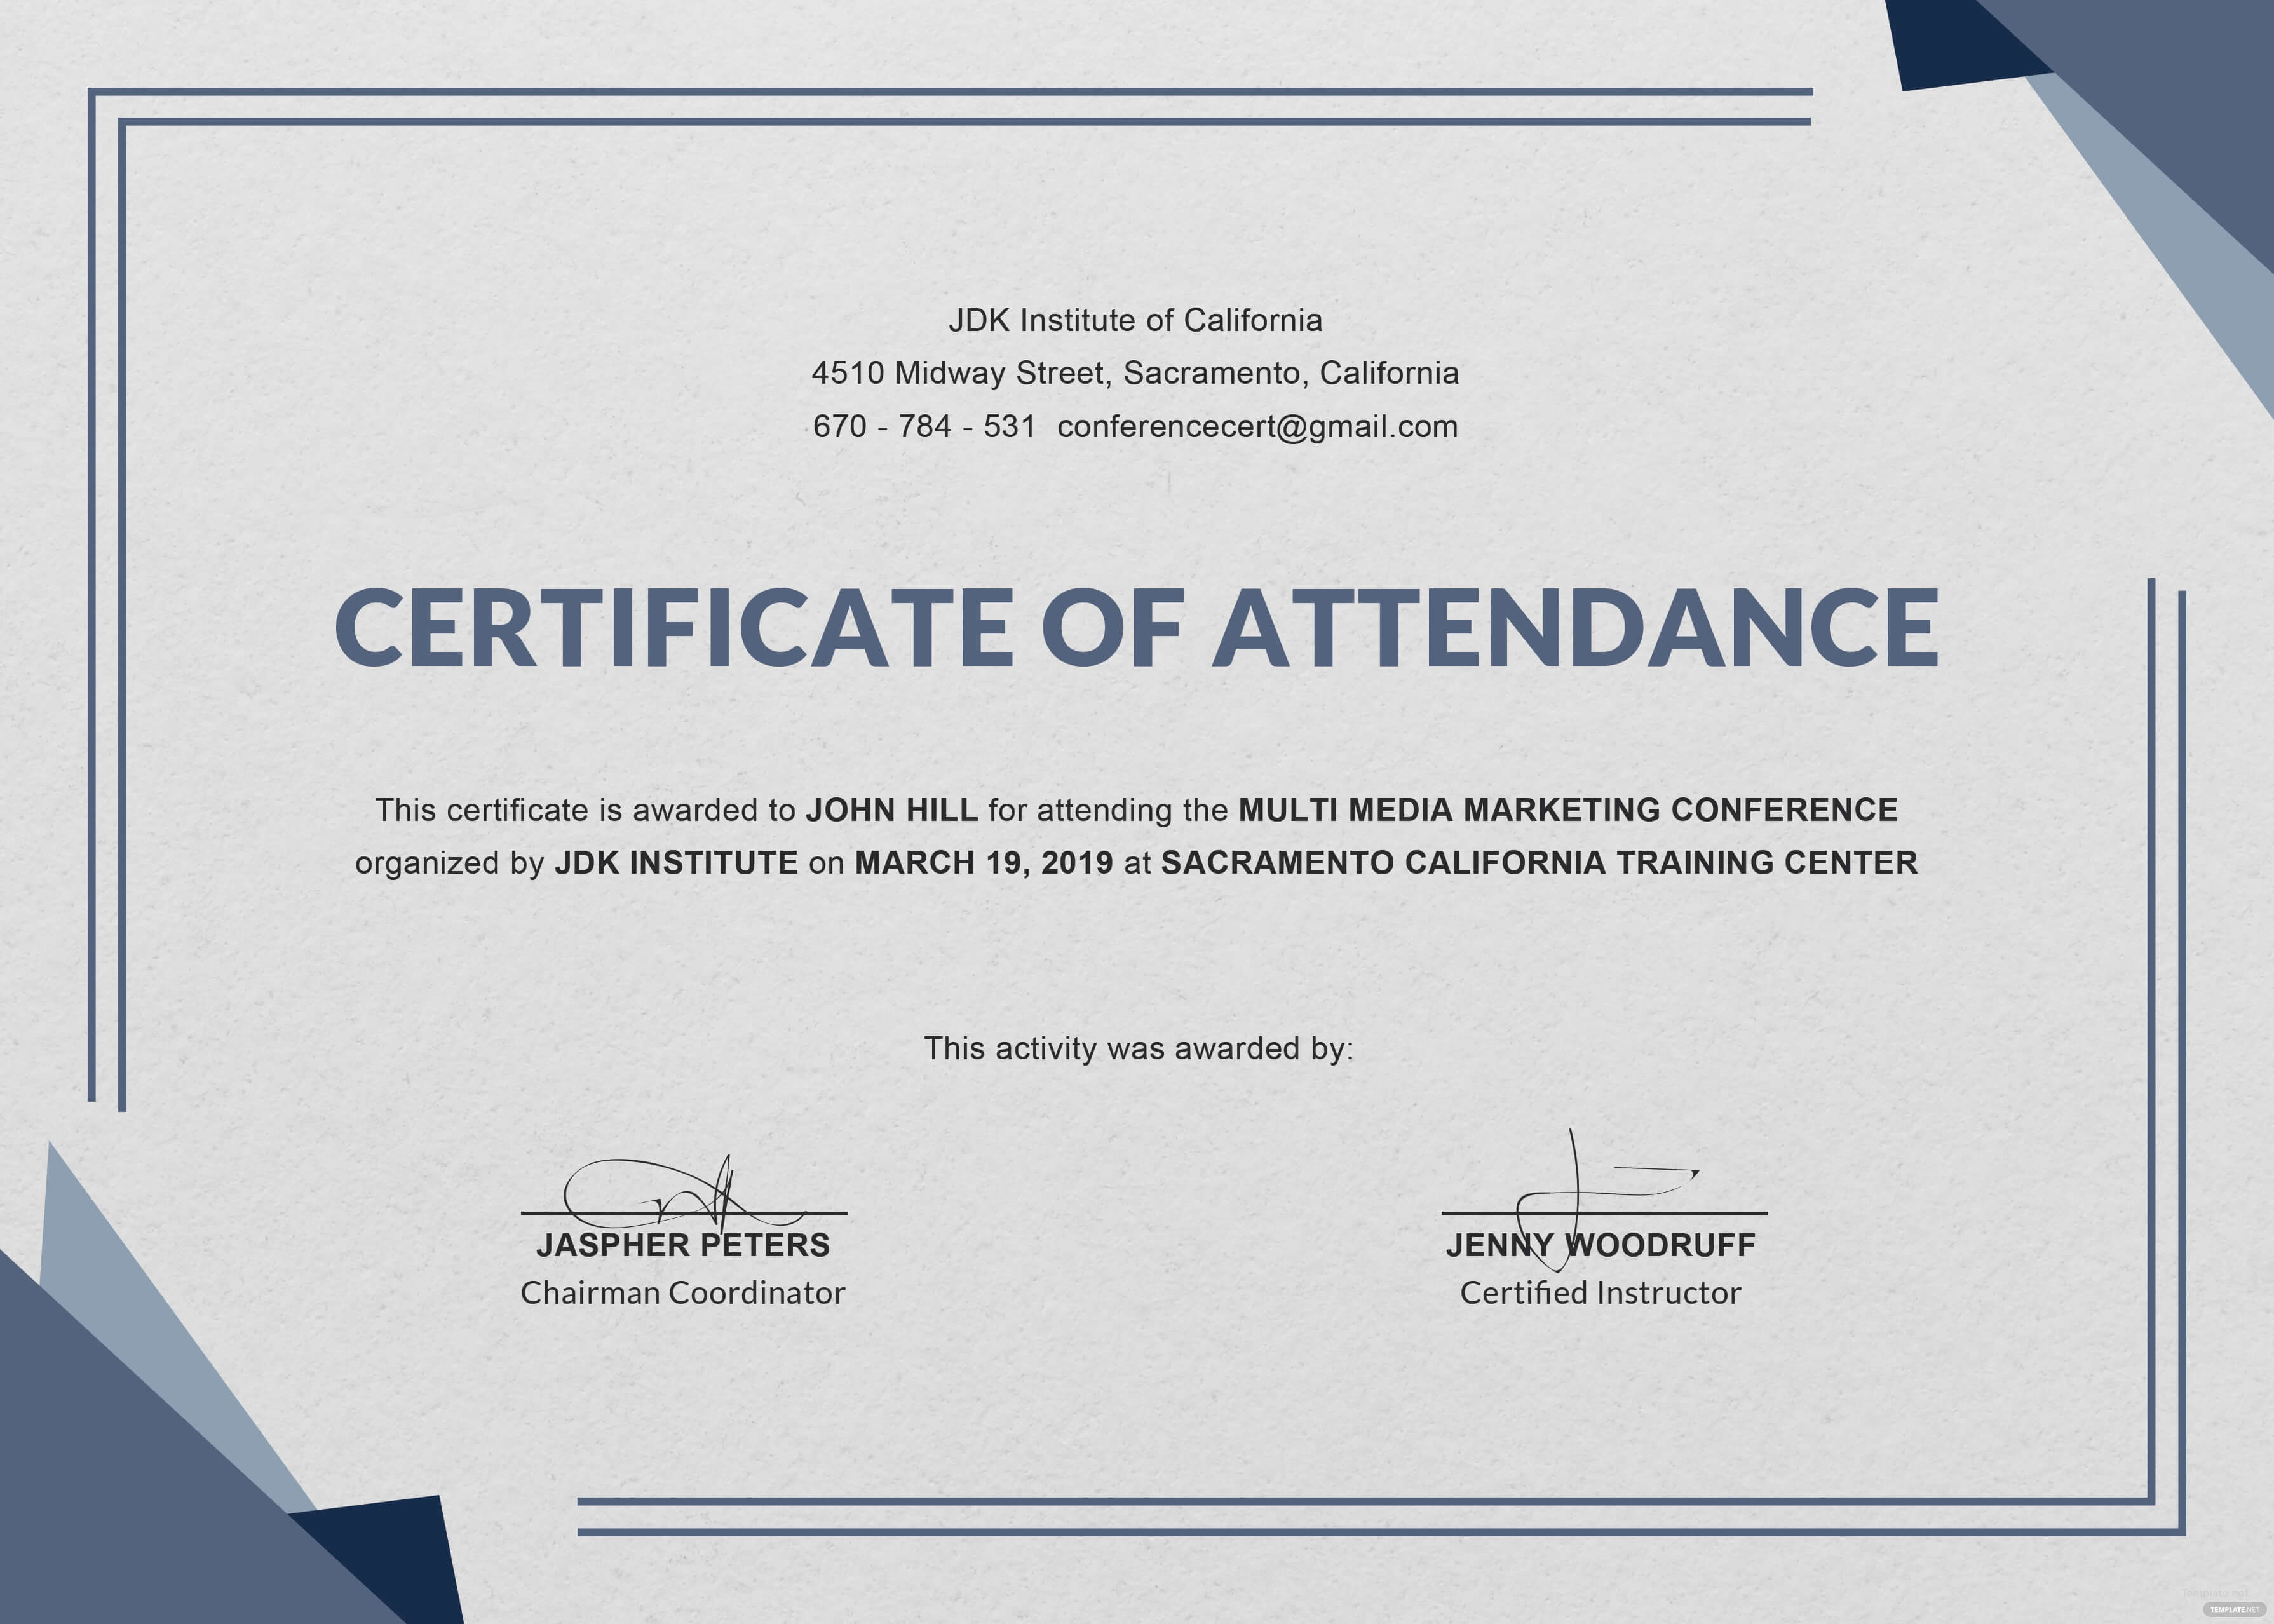 conference certificate of attendance template - Bicim With Regard To Conference Certificate Of Attendance Template